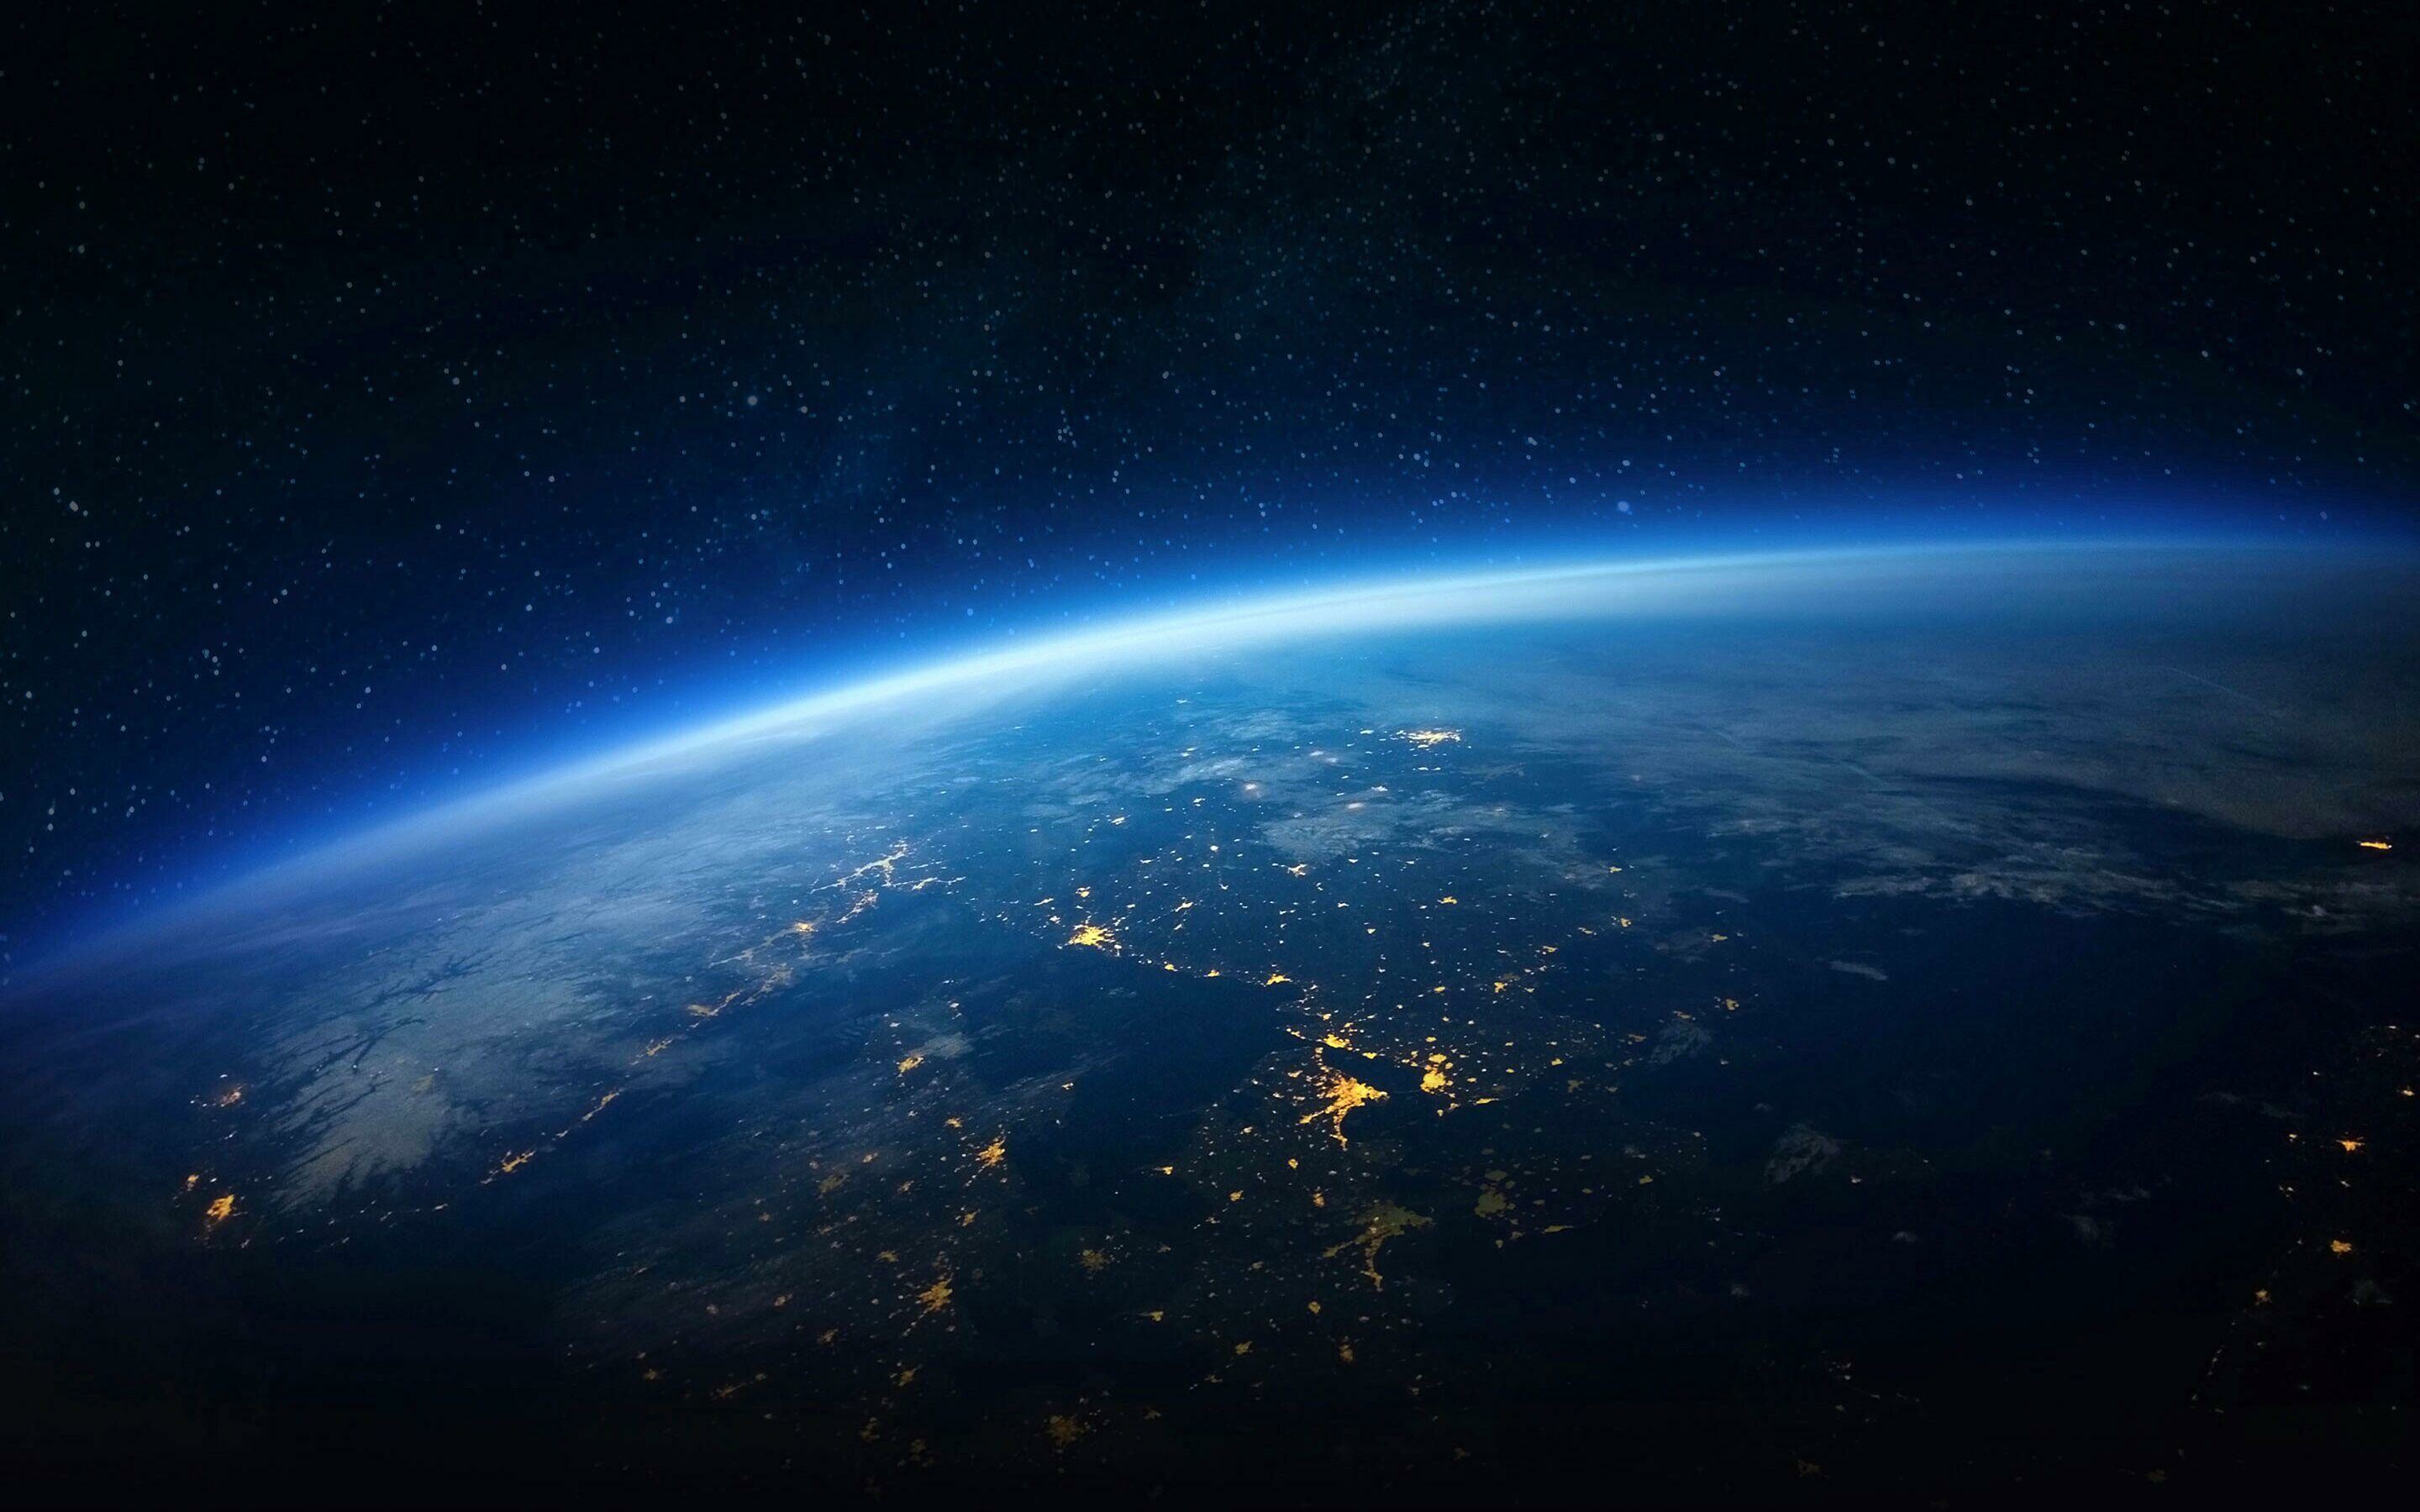 Earth at Night: The sky grew darker, painted blue on blue, one stroke at a time. 2880x1800 HD Wallpaper.